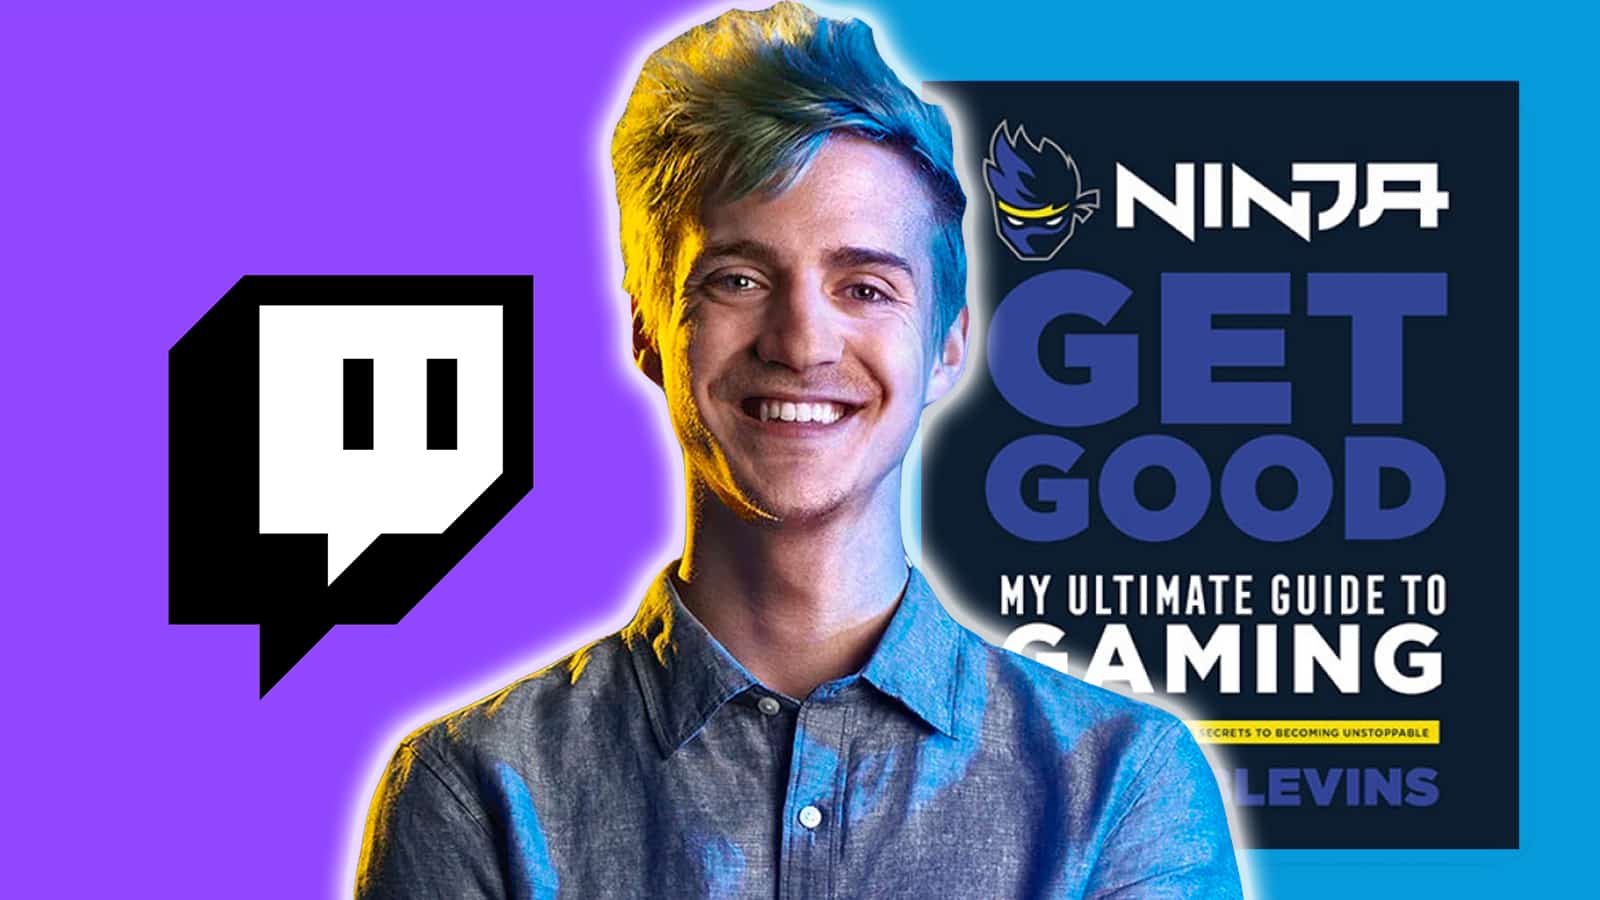 An image of Ninja next his book and the twitch logo.